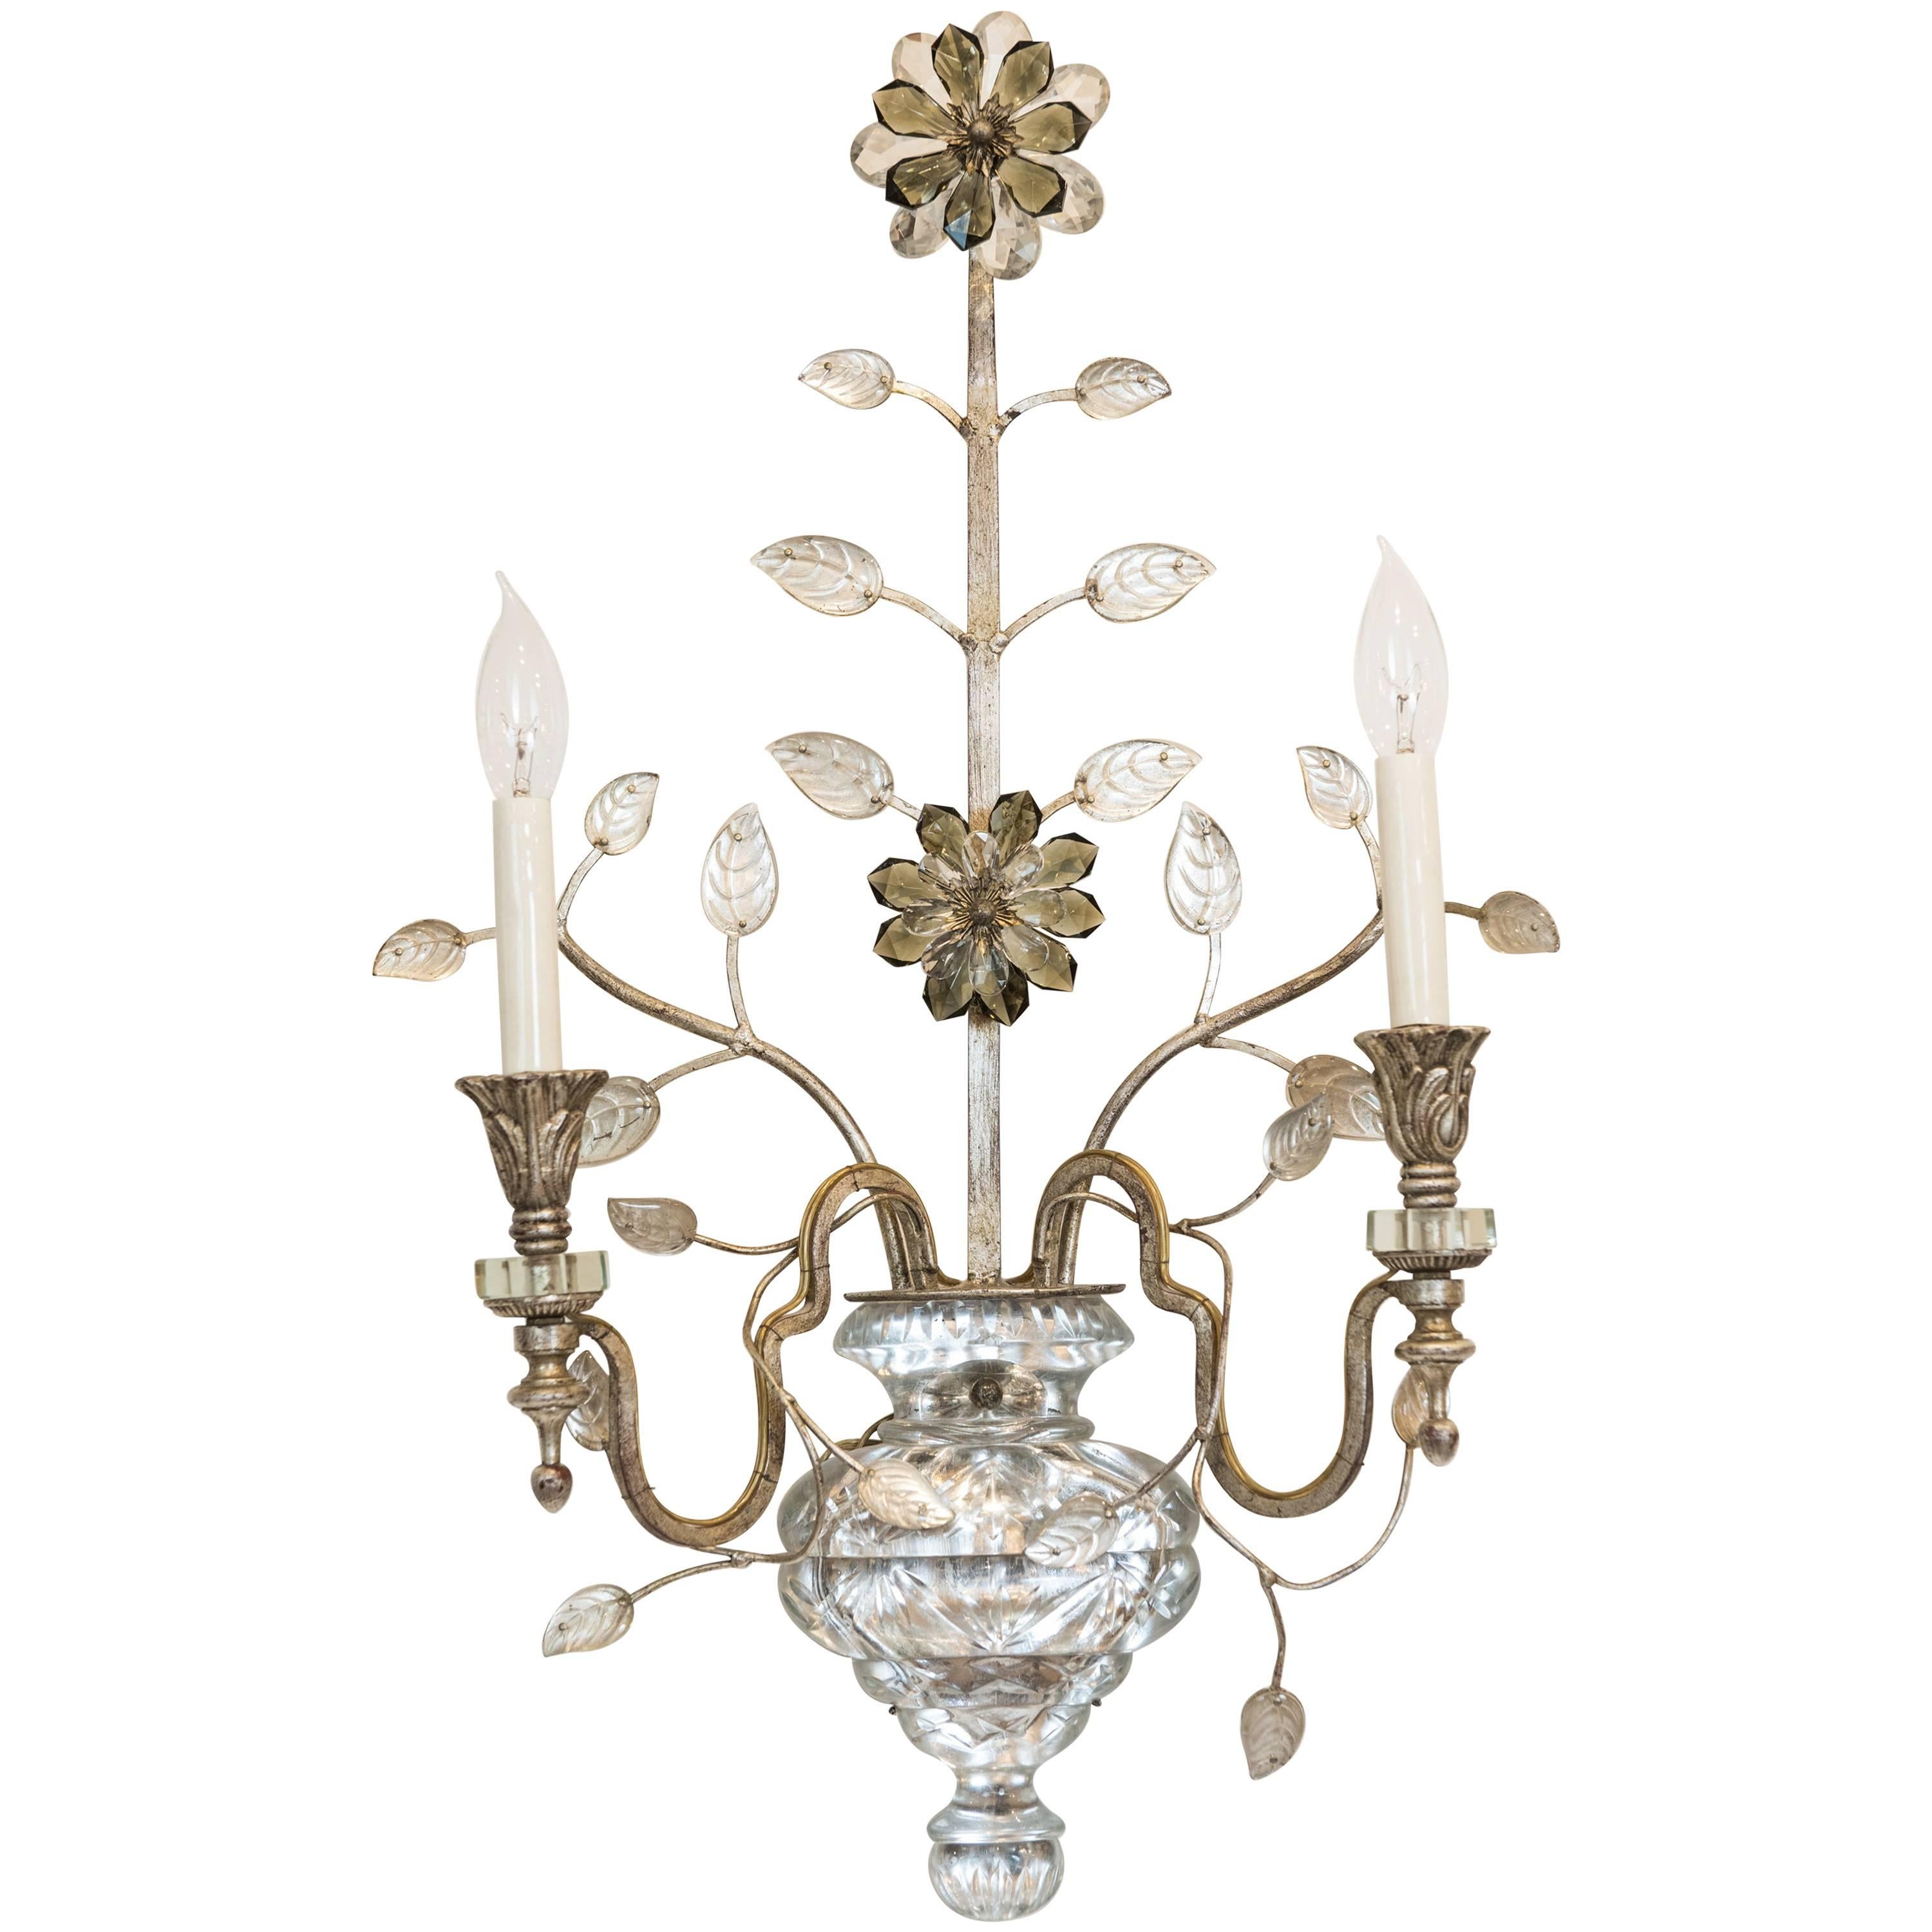 Single Silver Leaf Bagues Style Sconce from Italy